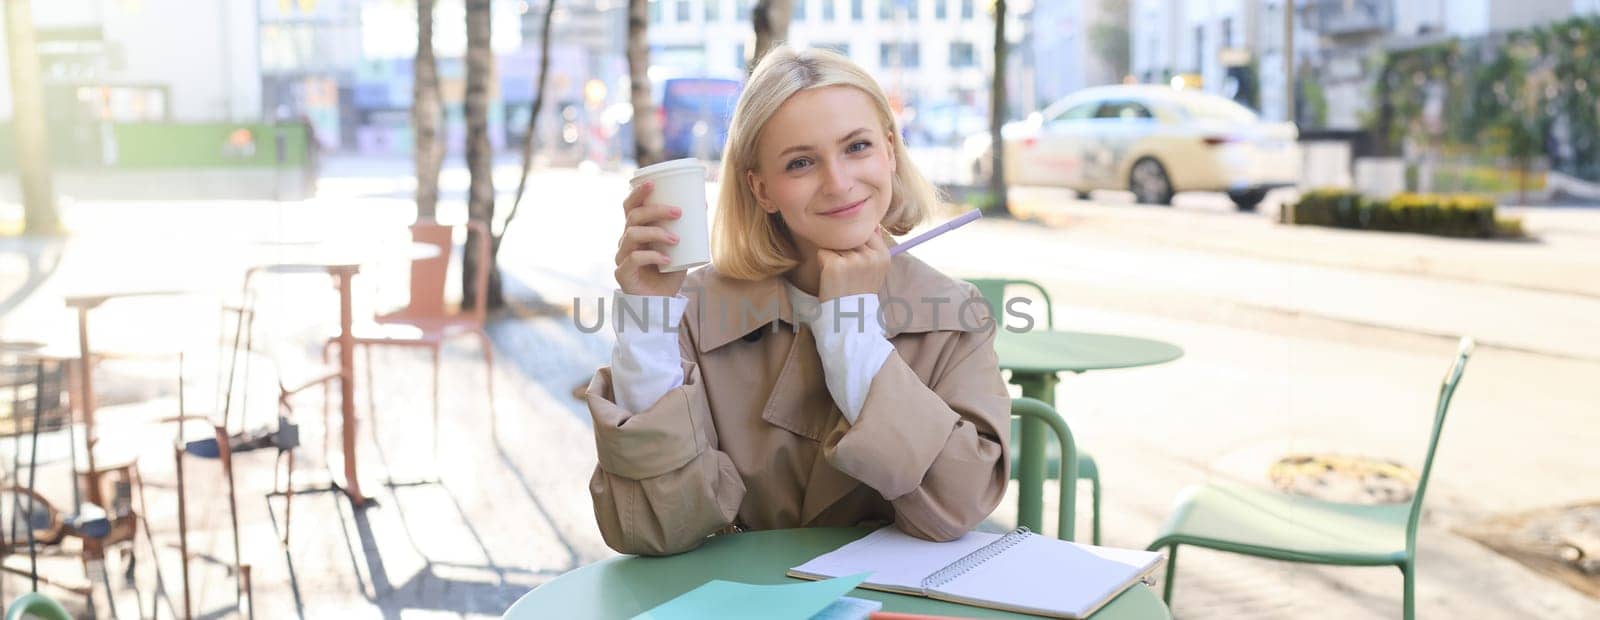 Stylish young urban woman, sitting in cafe and drinking coffee, smiling and looking at camera, doing homework or working on project, making notes in notebook.